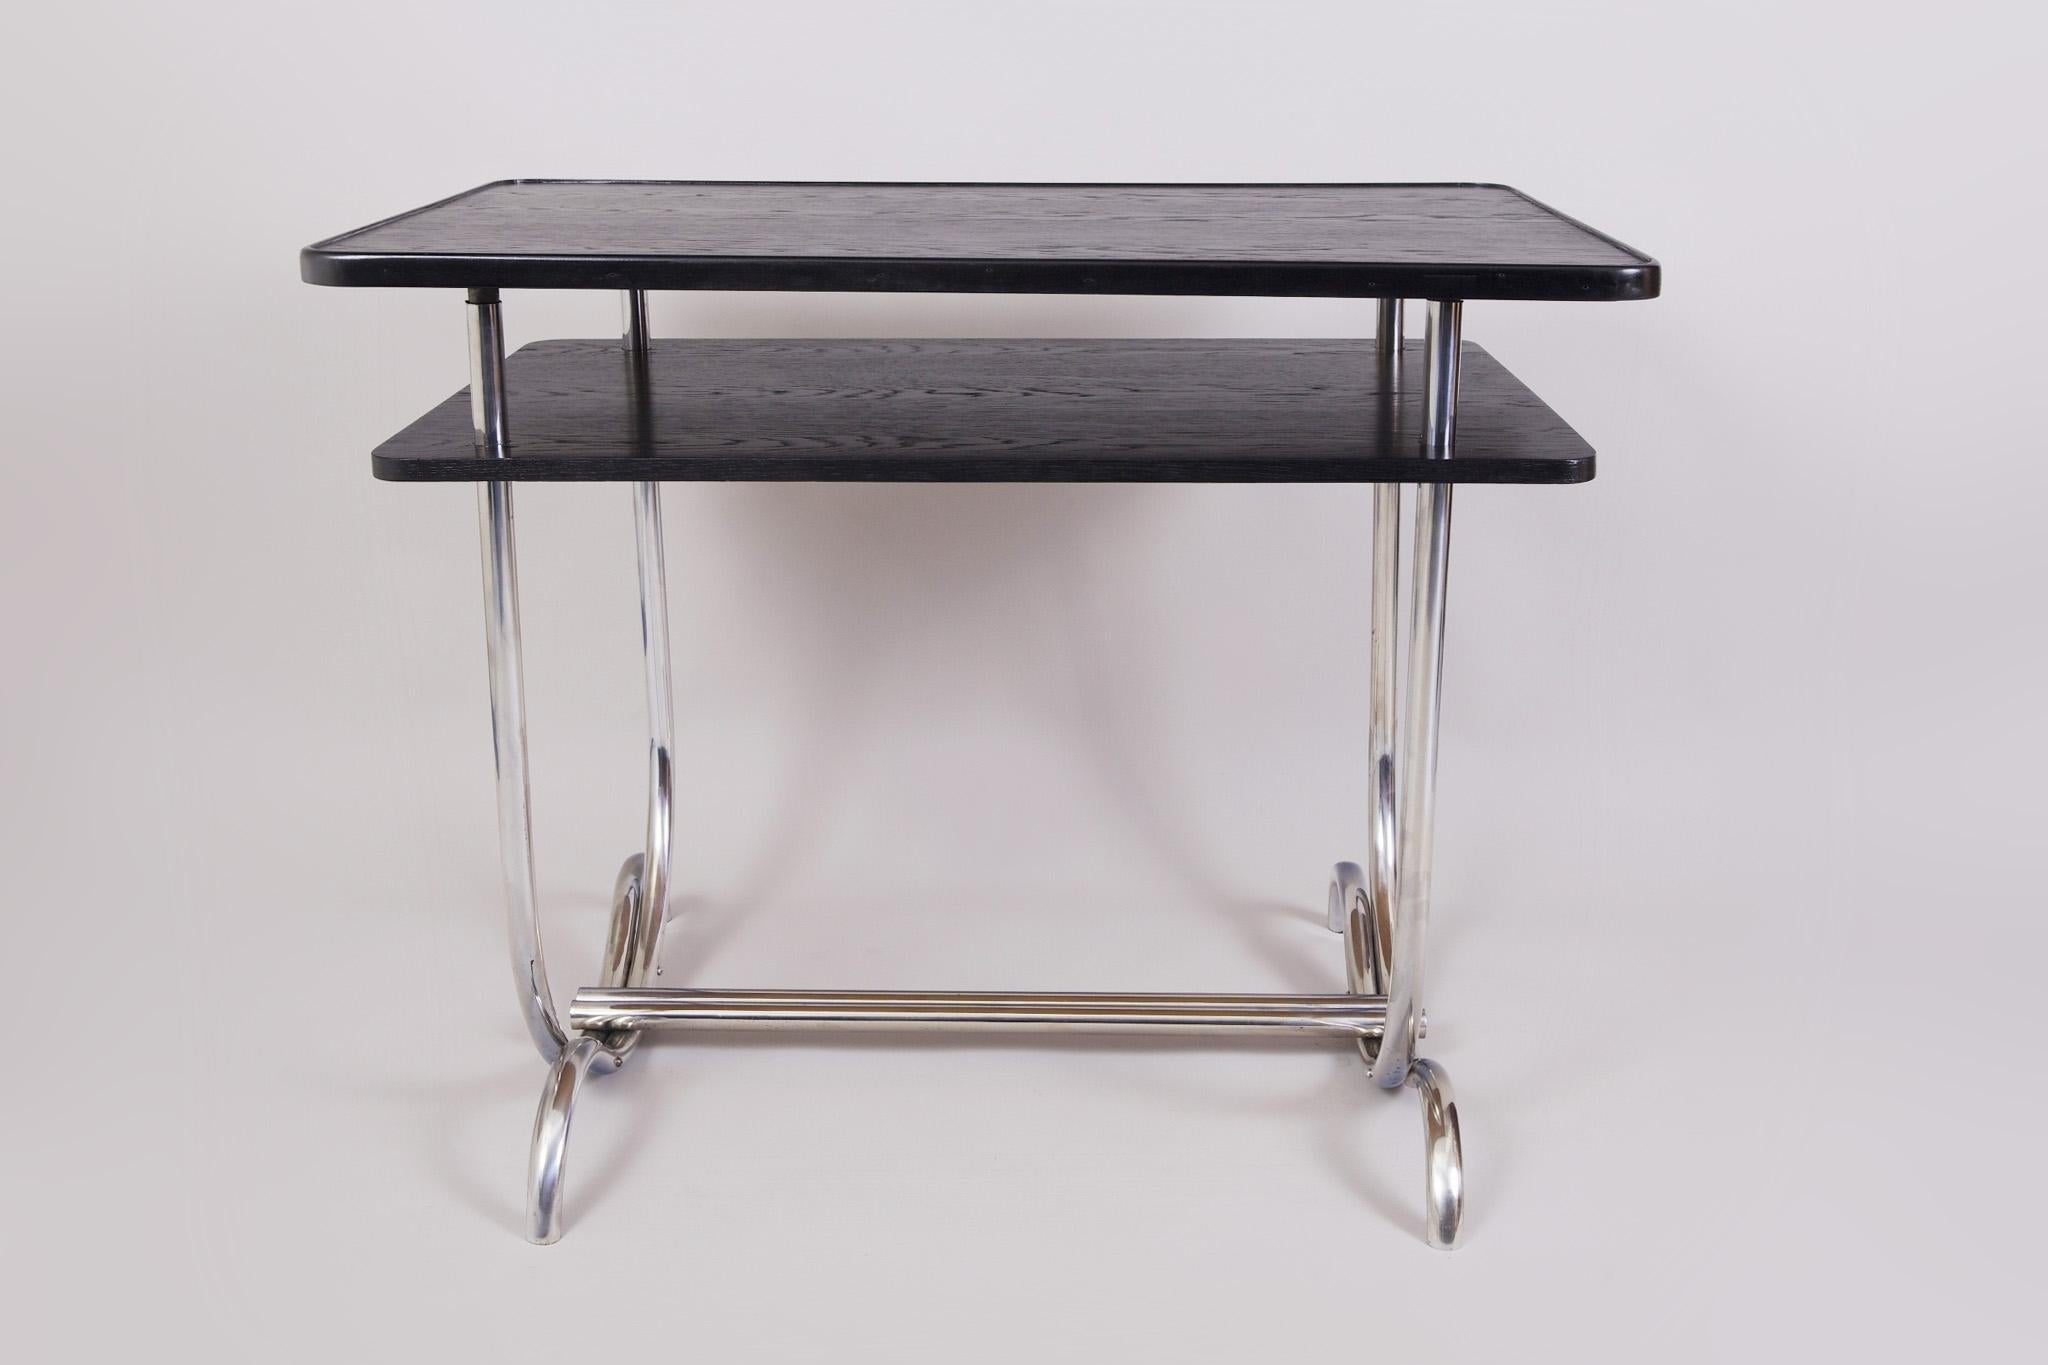 Made in Germany in the 1930s and restored by our team. 
The wood used for the top is Oak.
Chromed Steel frame.